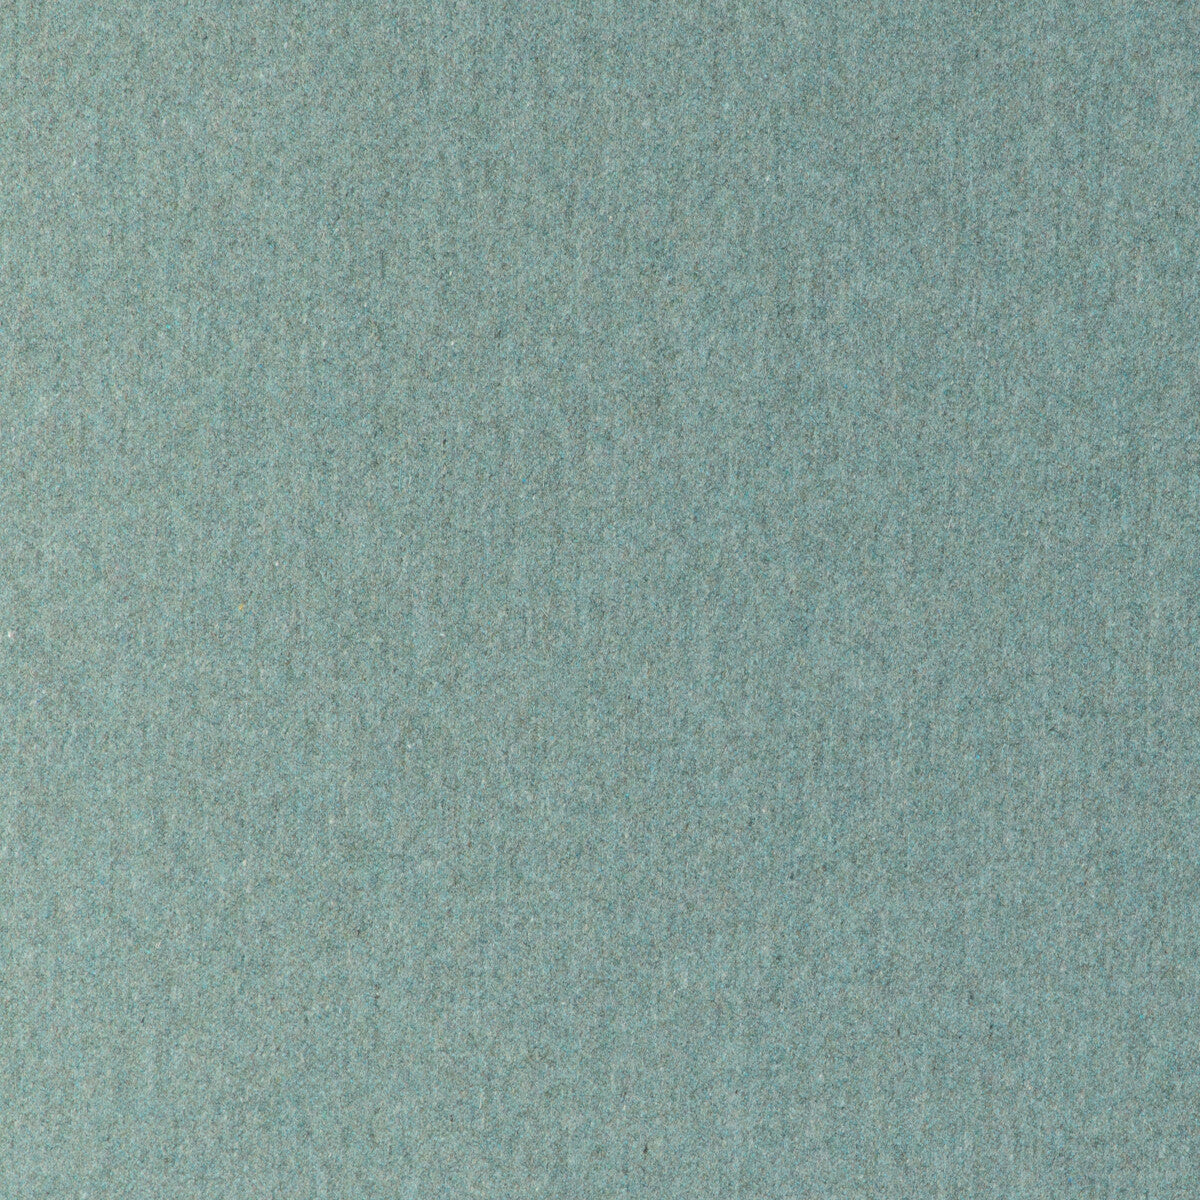 Jefferson Wool fabric in mineral green color - pattern 34397.35.0 - by Kravet Contract